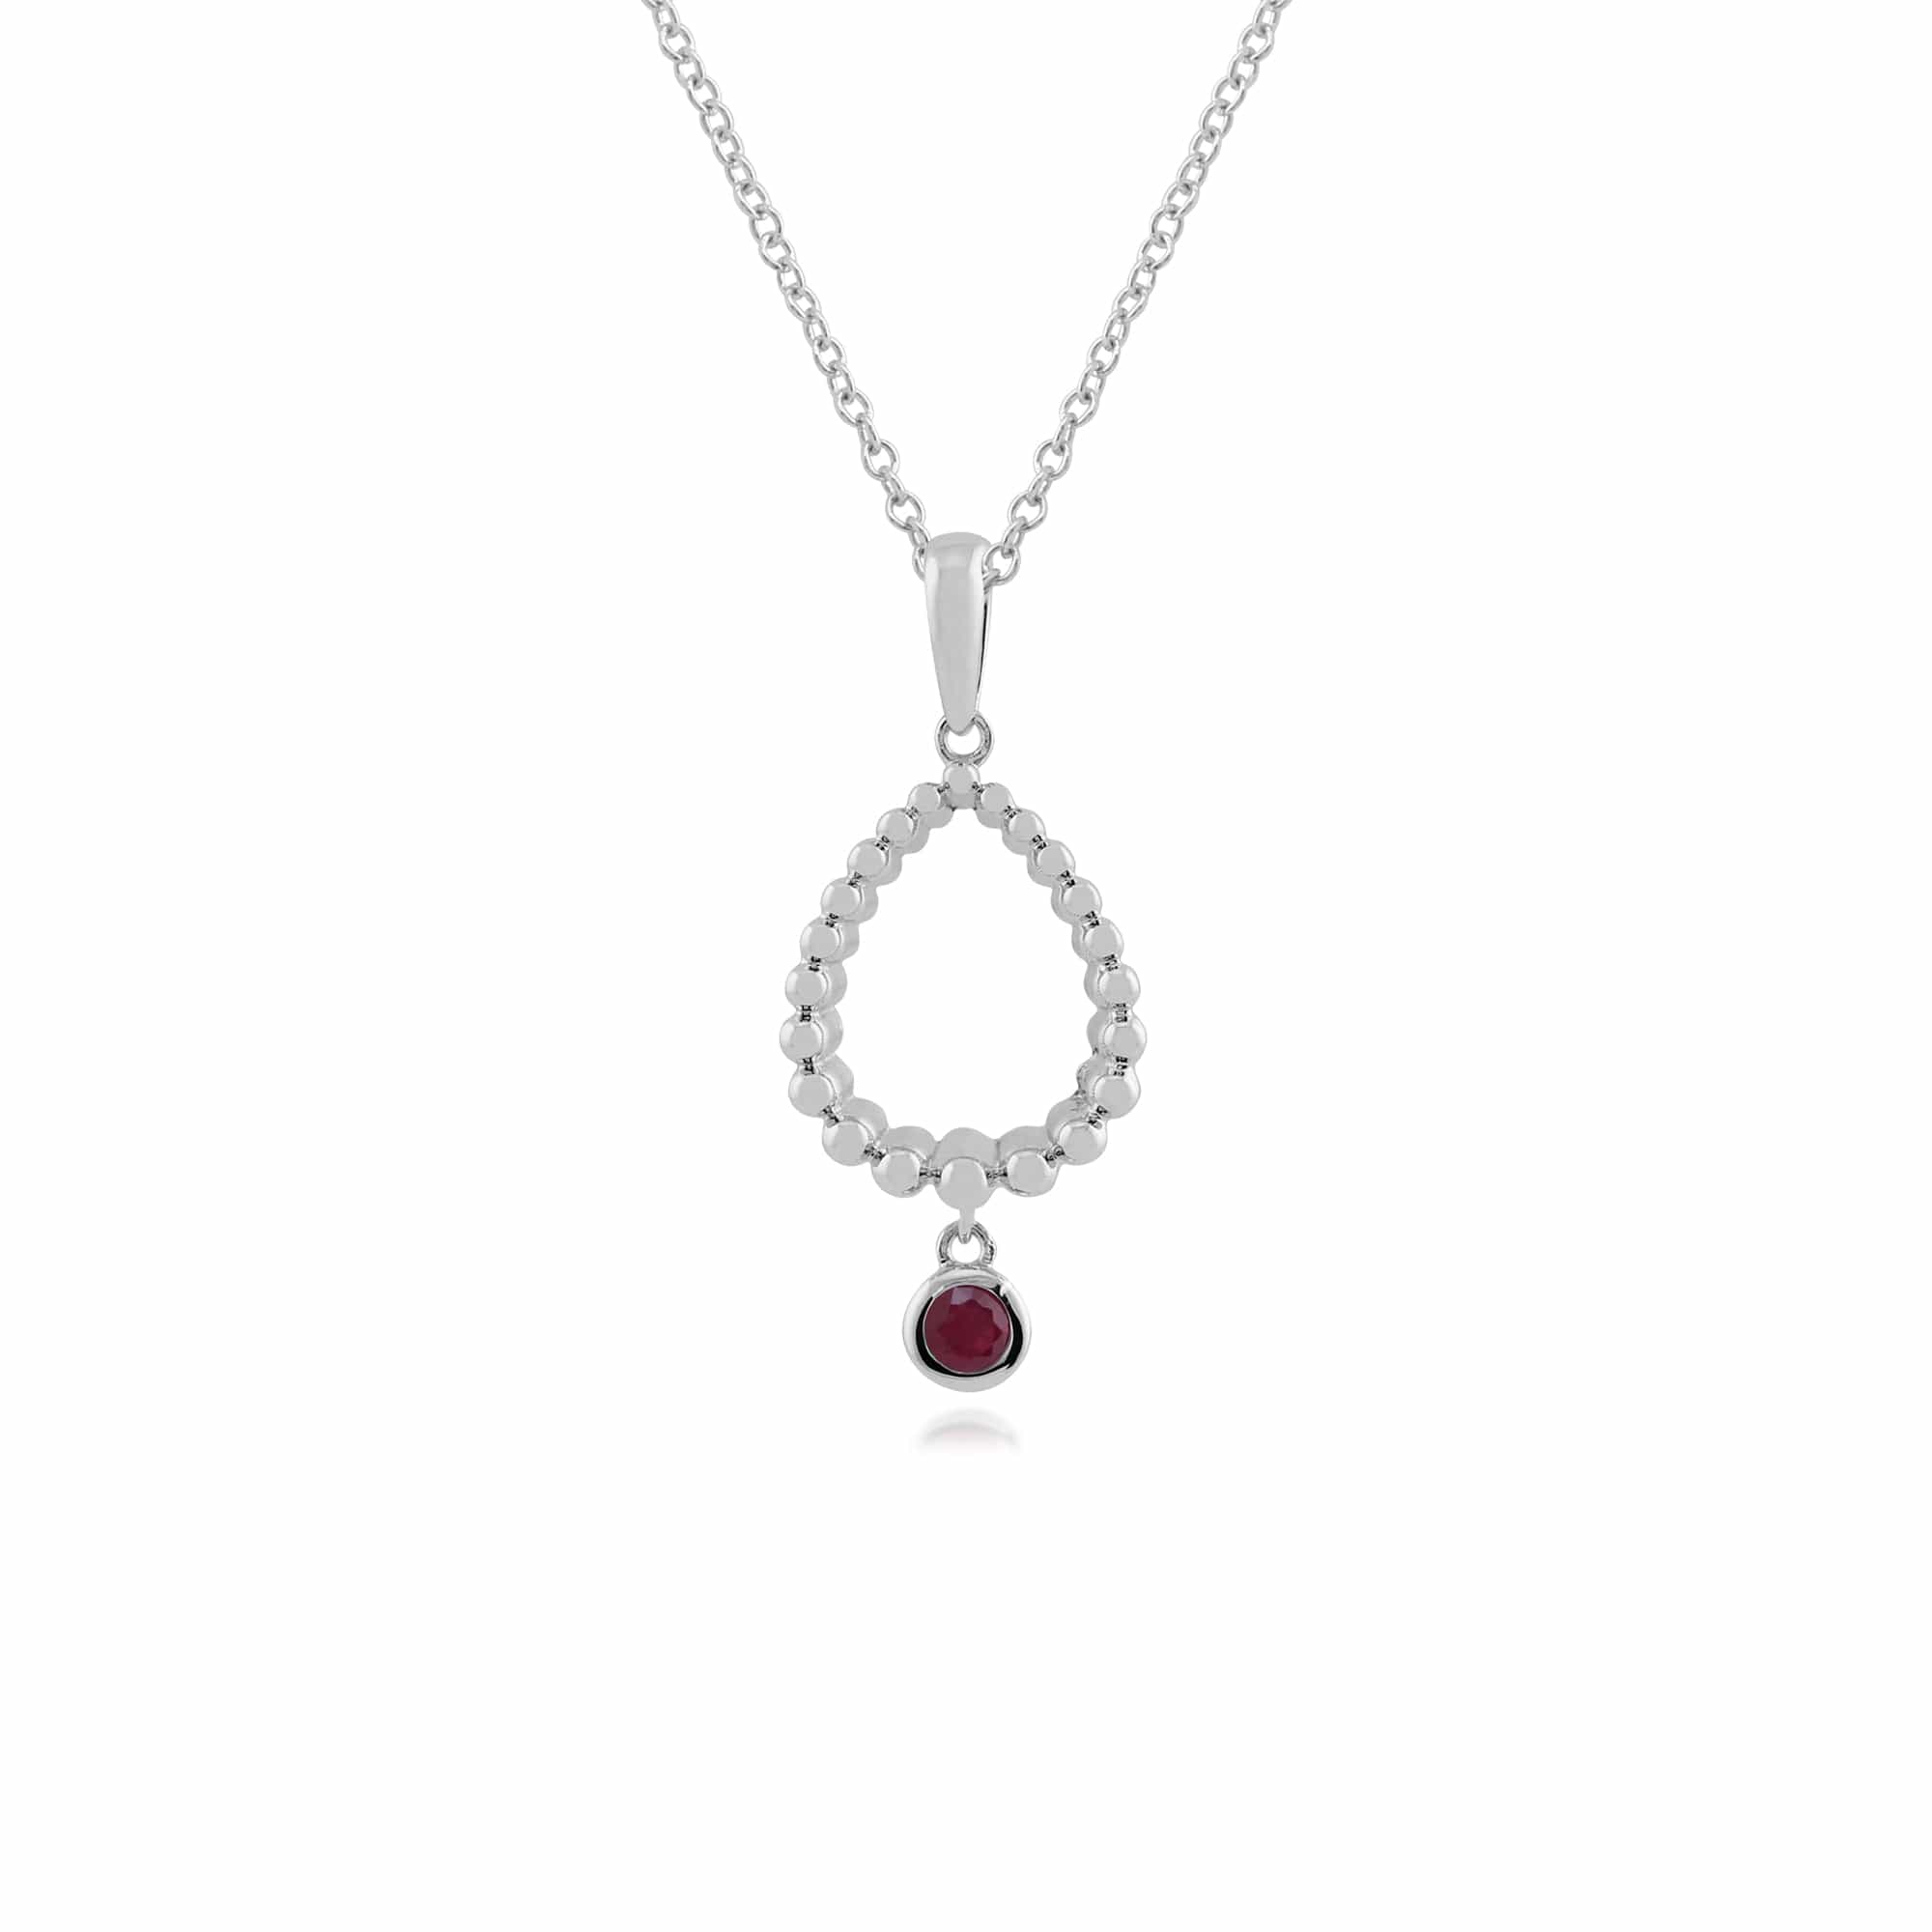 Gemondo 925 Sterling Silver 0.14ct Ruby Pendant on 45cm Chain Image